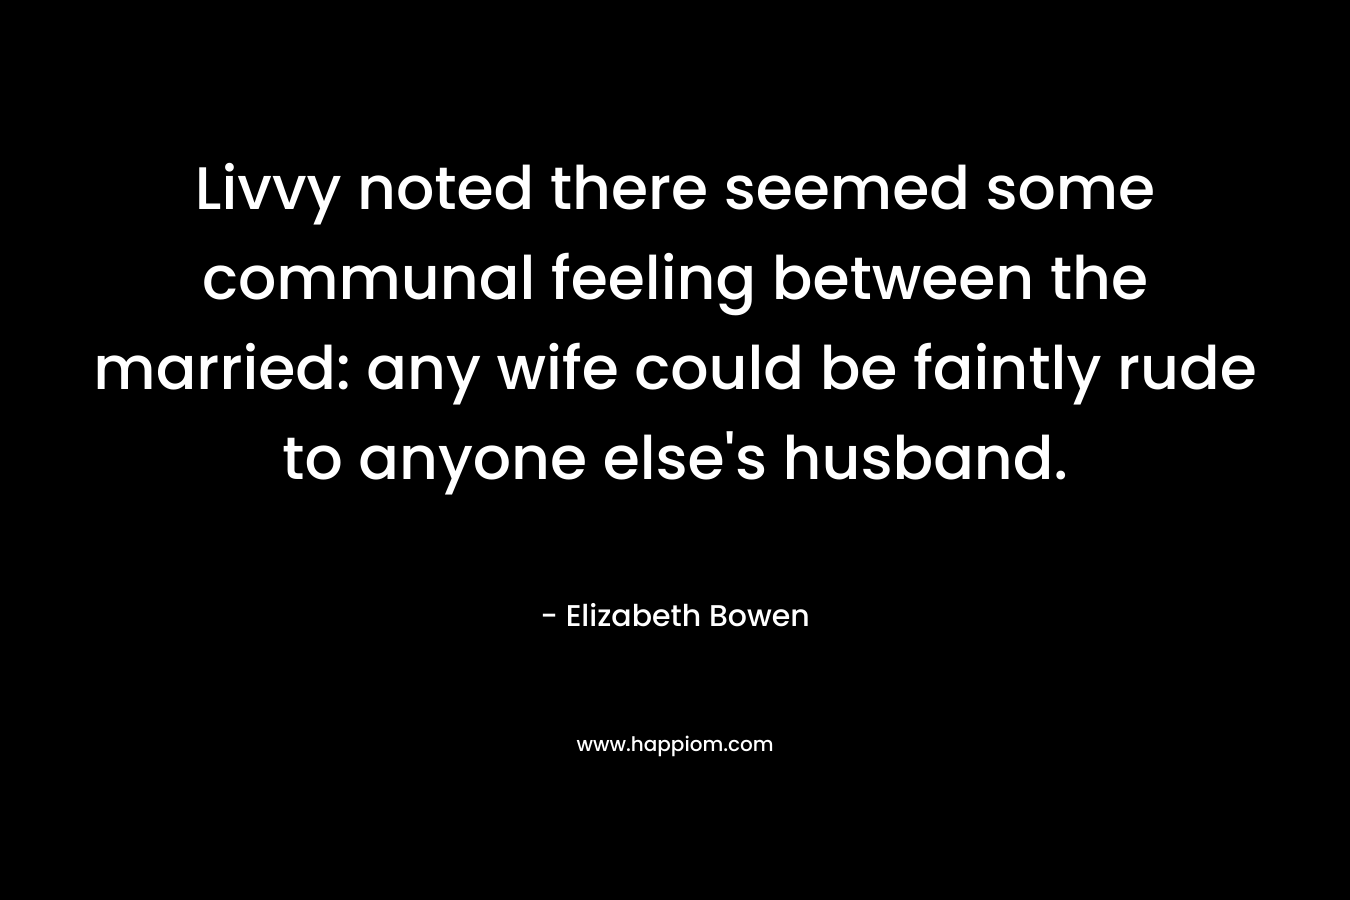 Livvy noted there seemed some communal feeling between the married: any wife could be faintly rude to anyone else’s husband. – Elizabeth Bowen